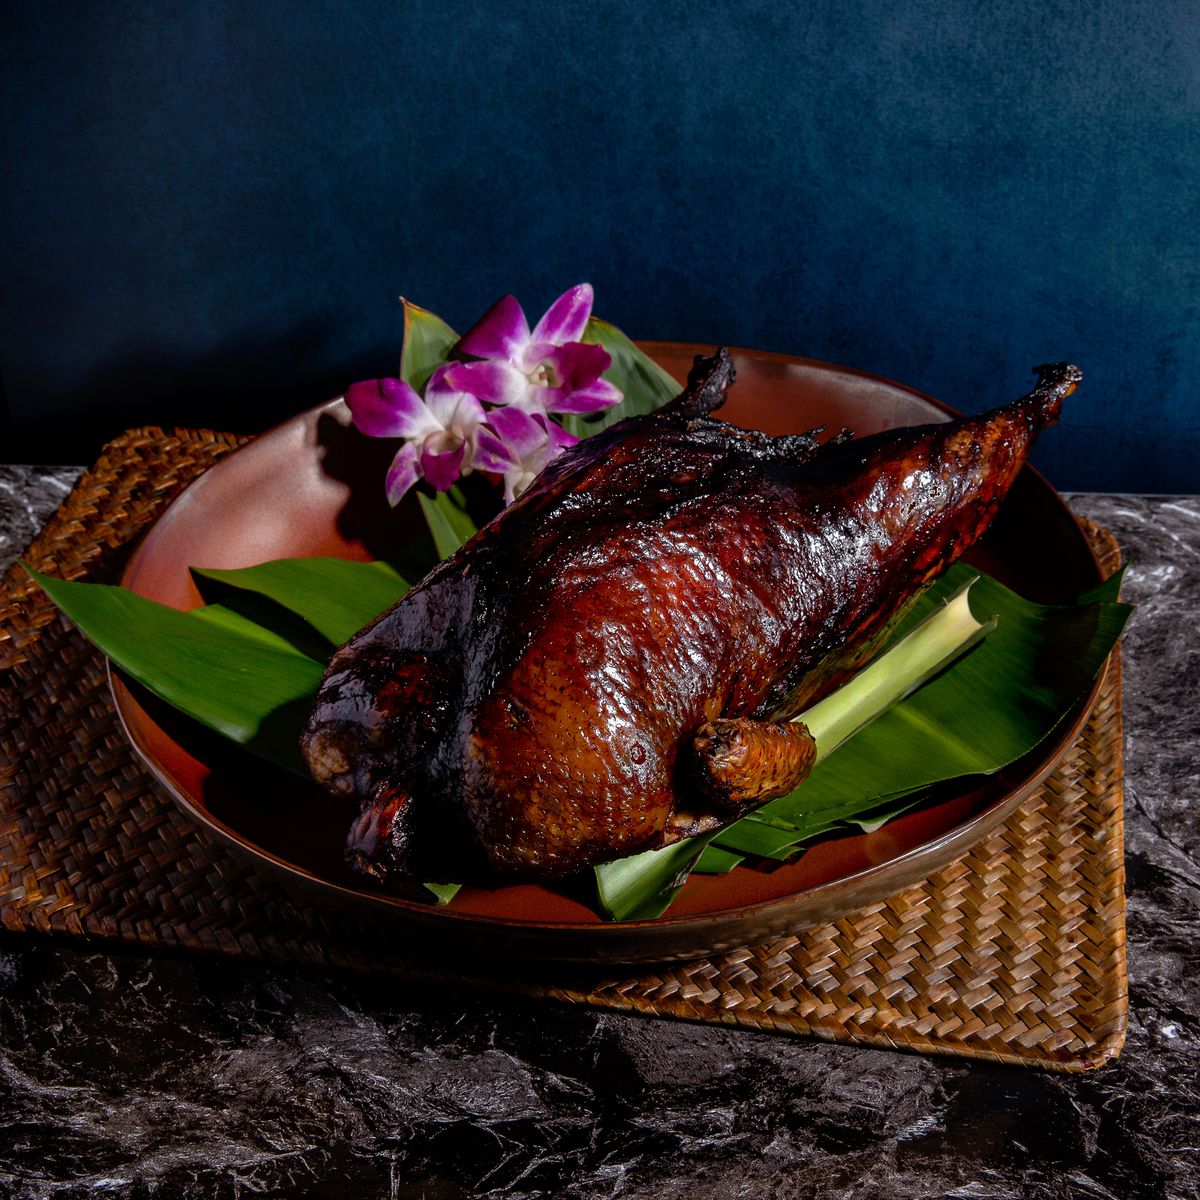 A roasted whole duck sits on banana leaves on a bamboo tray; it’s garnished with orchids.